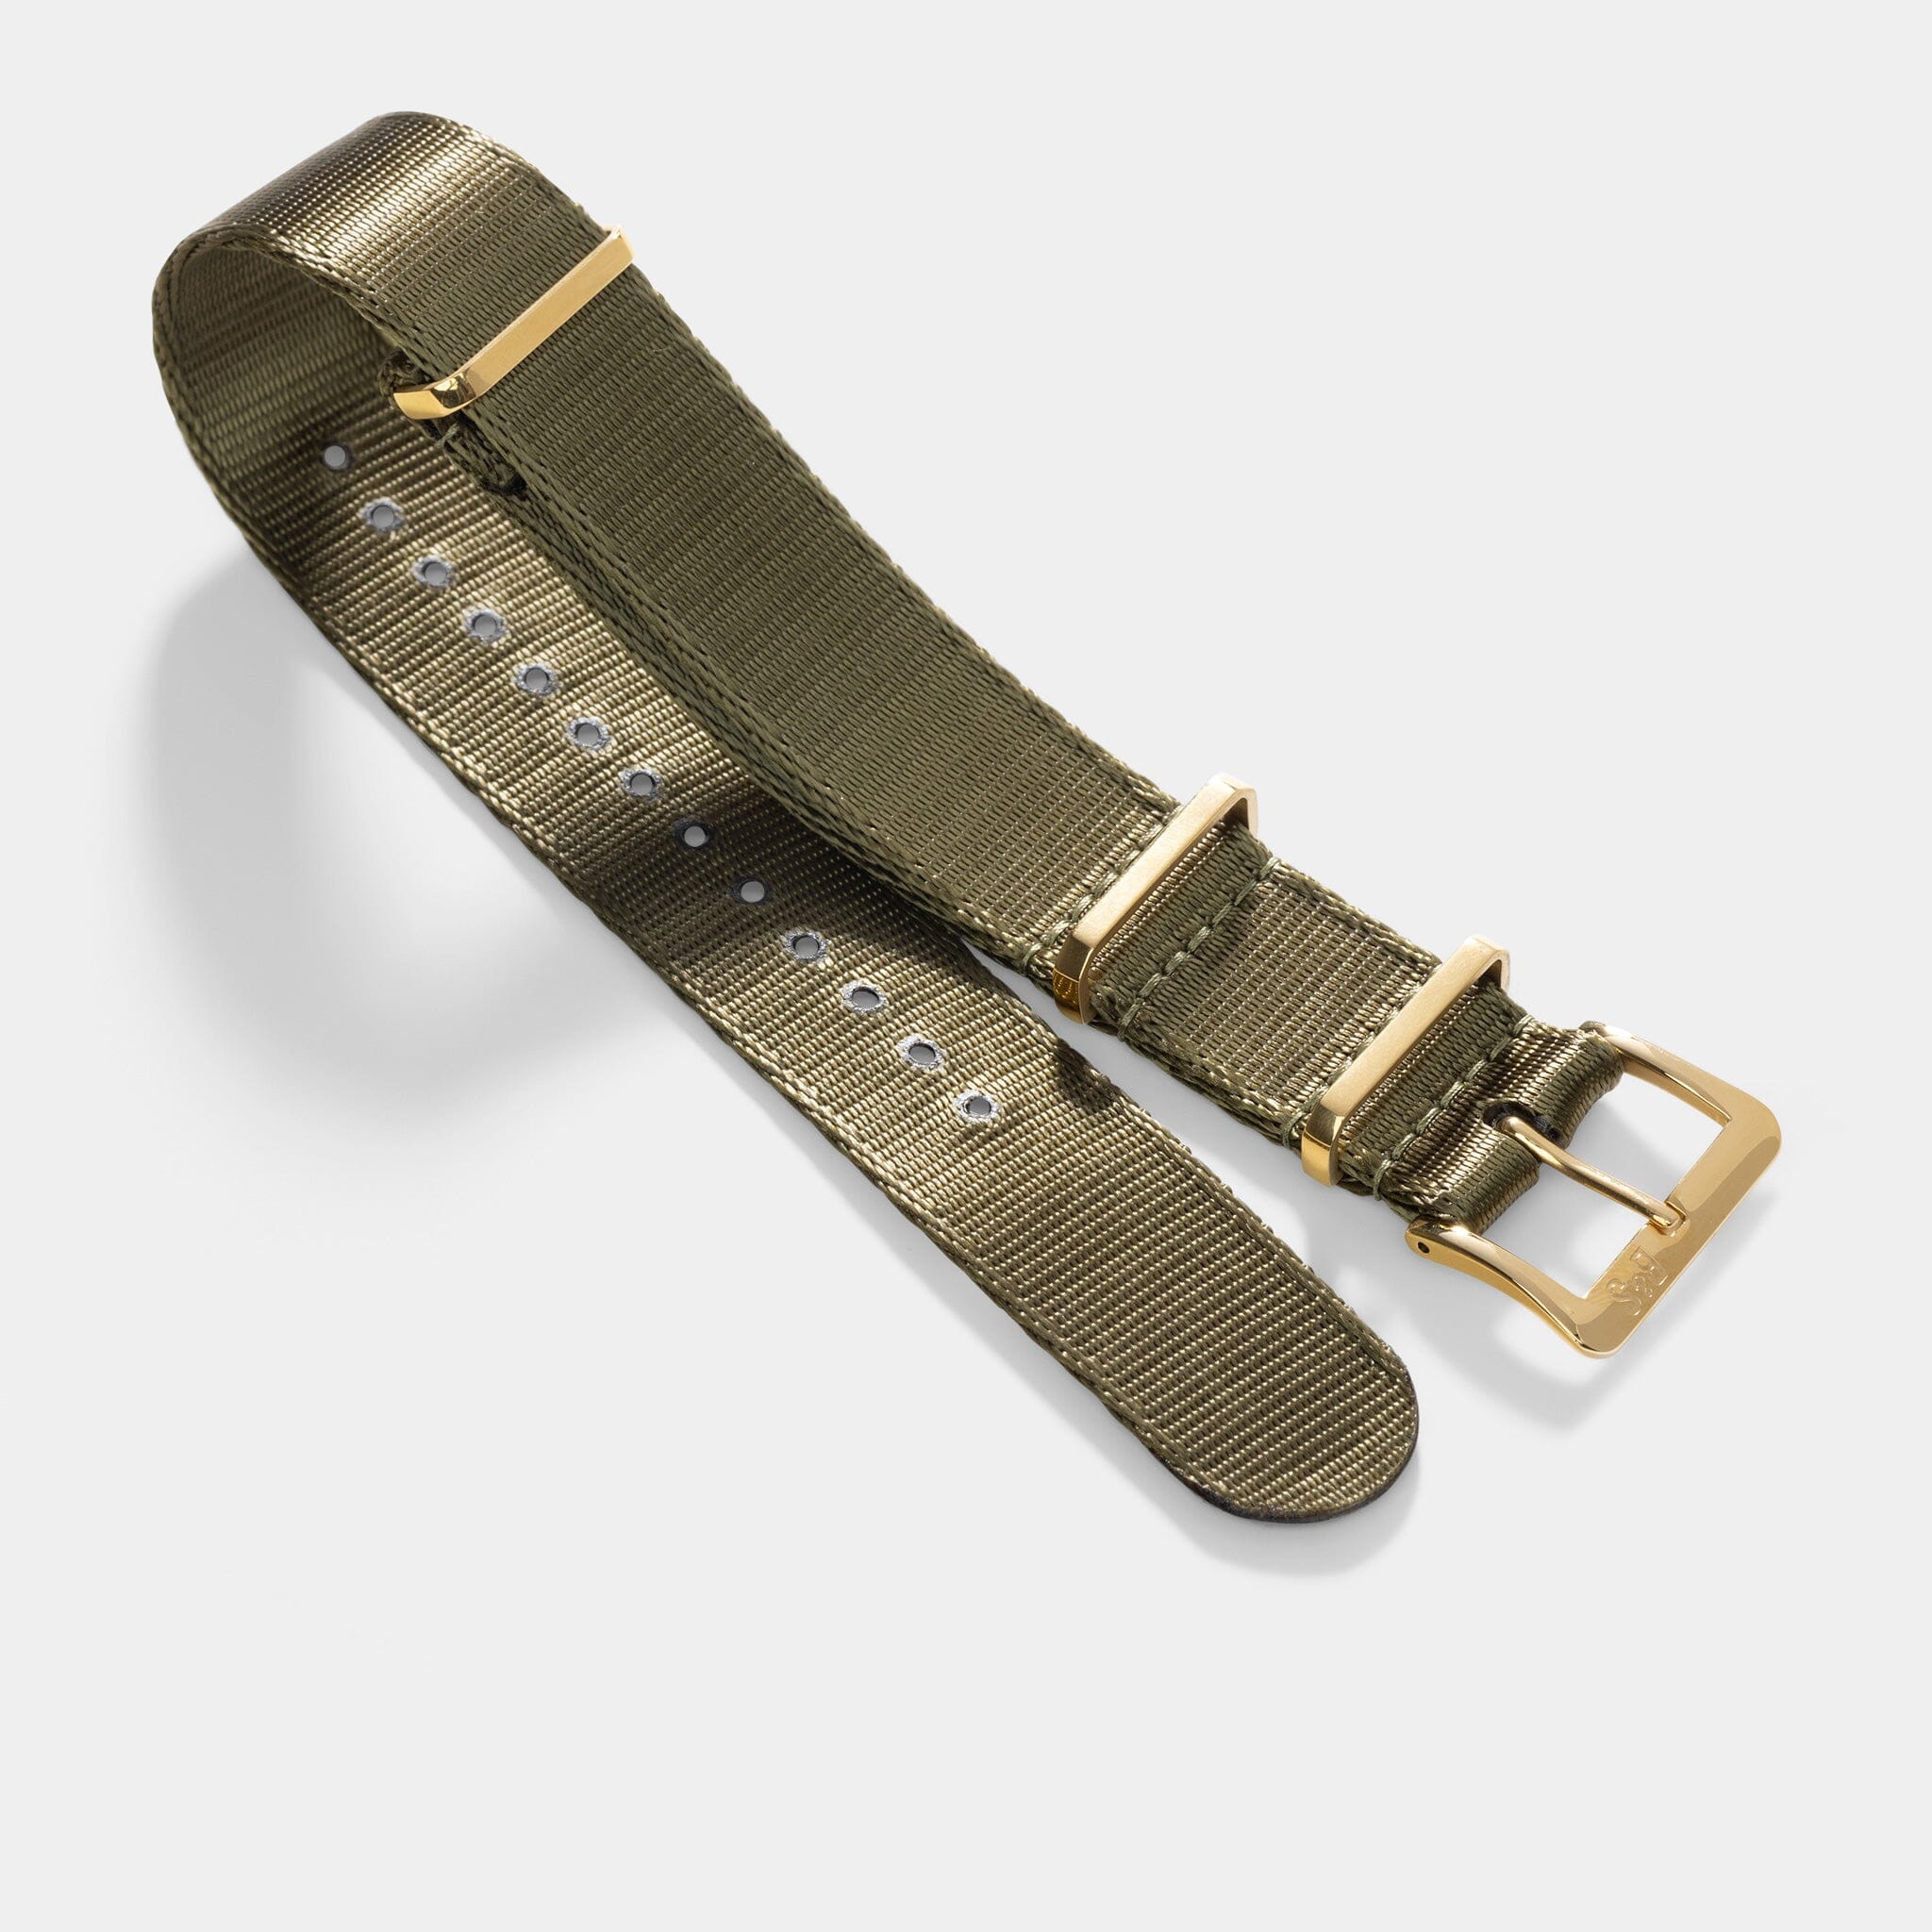 Deluxe Nylon Single Pass Watch Strap Olive Drab Green - Gold